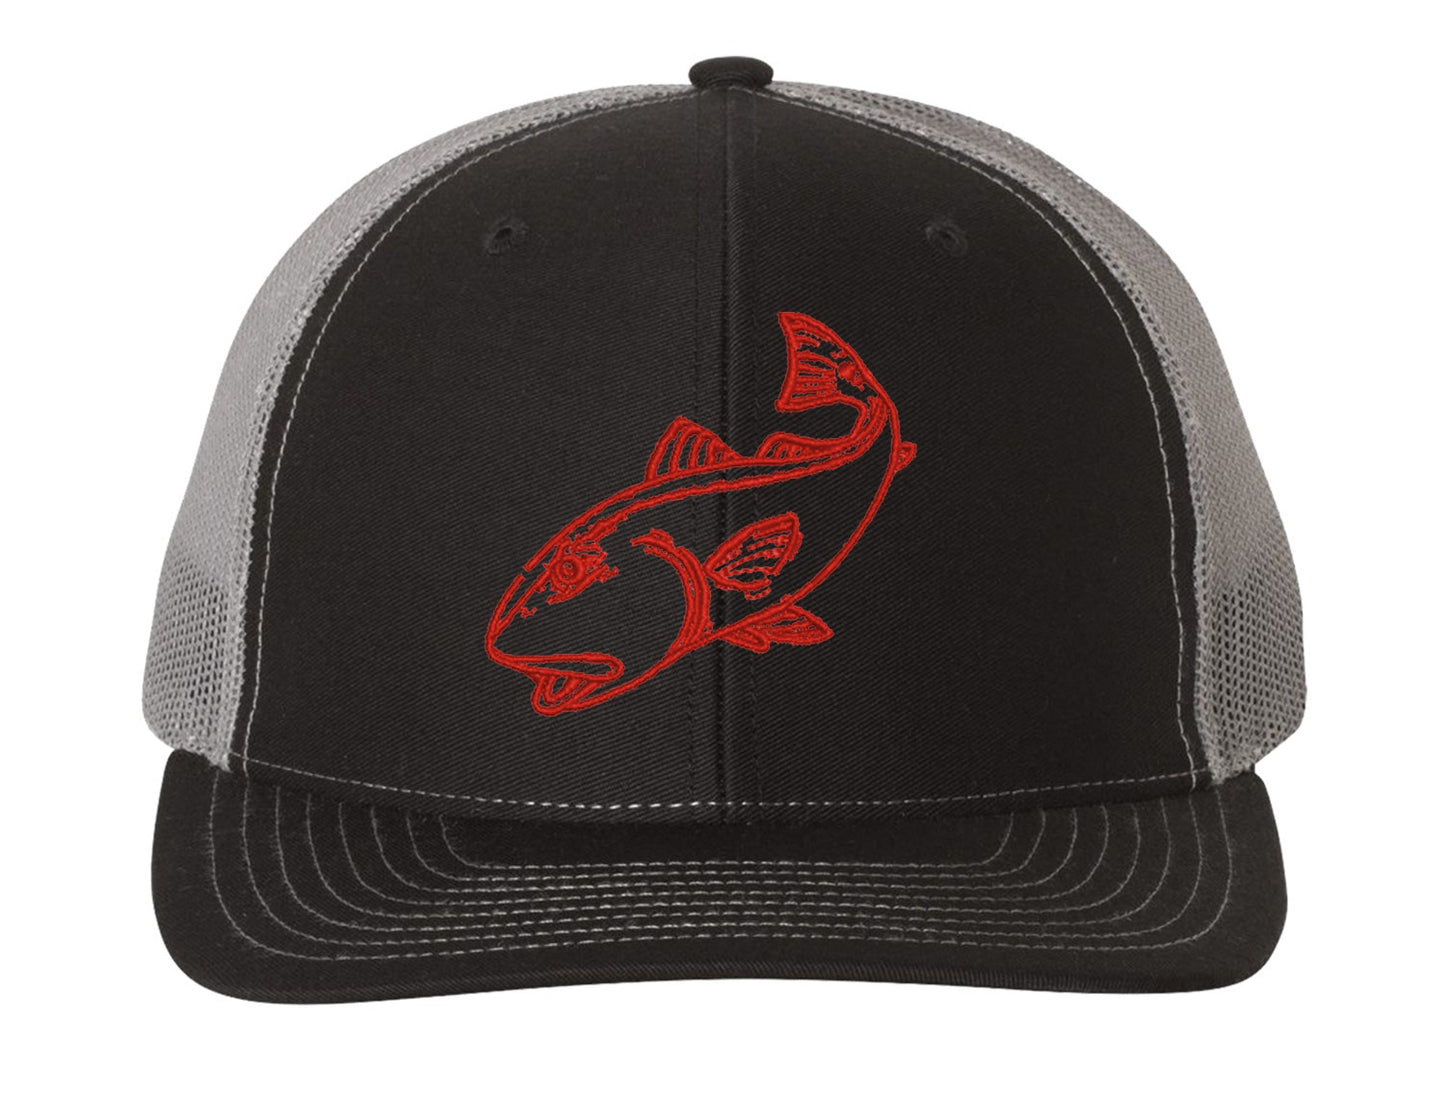 Redfish Black/Charcoal mesh Structured Trucker Hat w/Red Logo